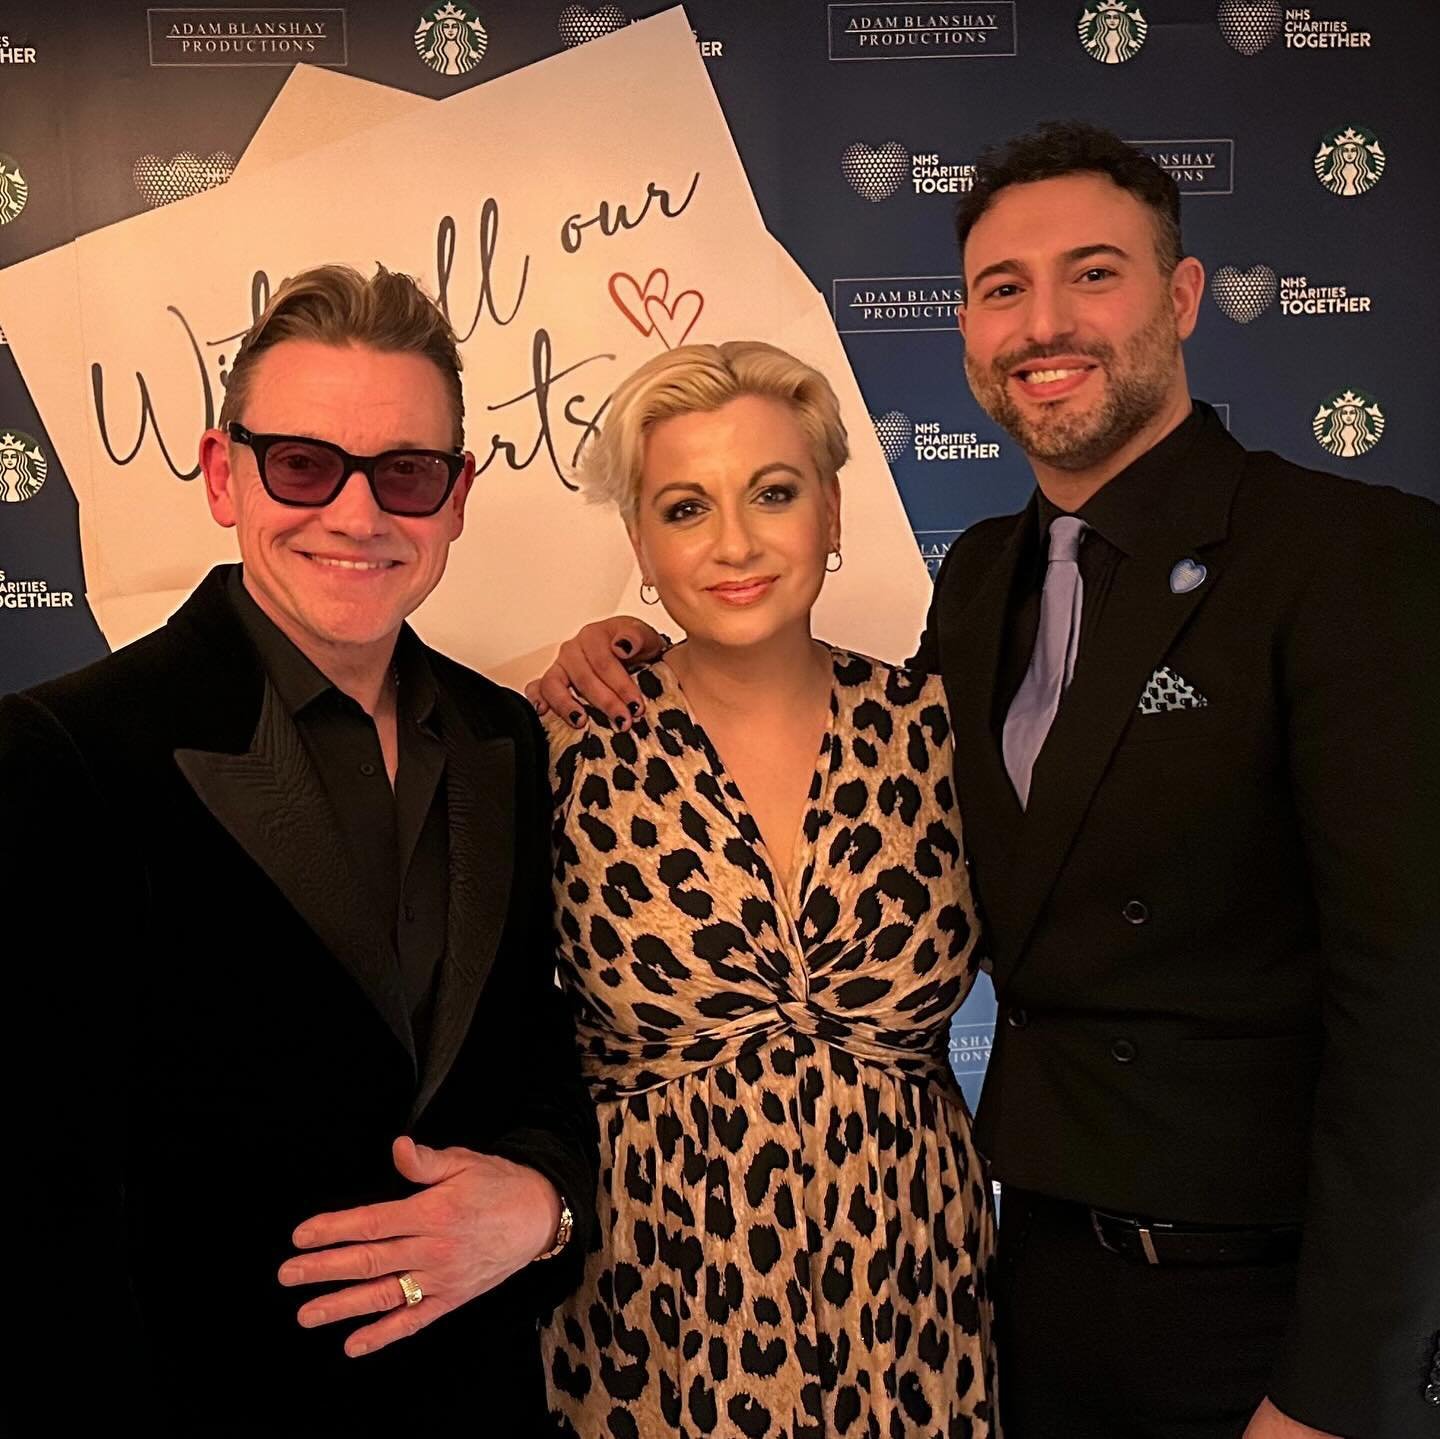 Fabulous to celebrate our #NHS last night at the #withallourheartsgala, produced by my friend @ablanshay1 and his team @adamblanshaypro alongside the wonderful creative team of @arlenephillips @robmadge02 &amp; @brindmatthew 💙 lovely to share the ev